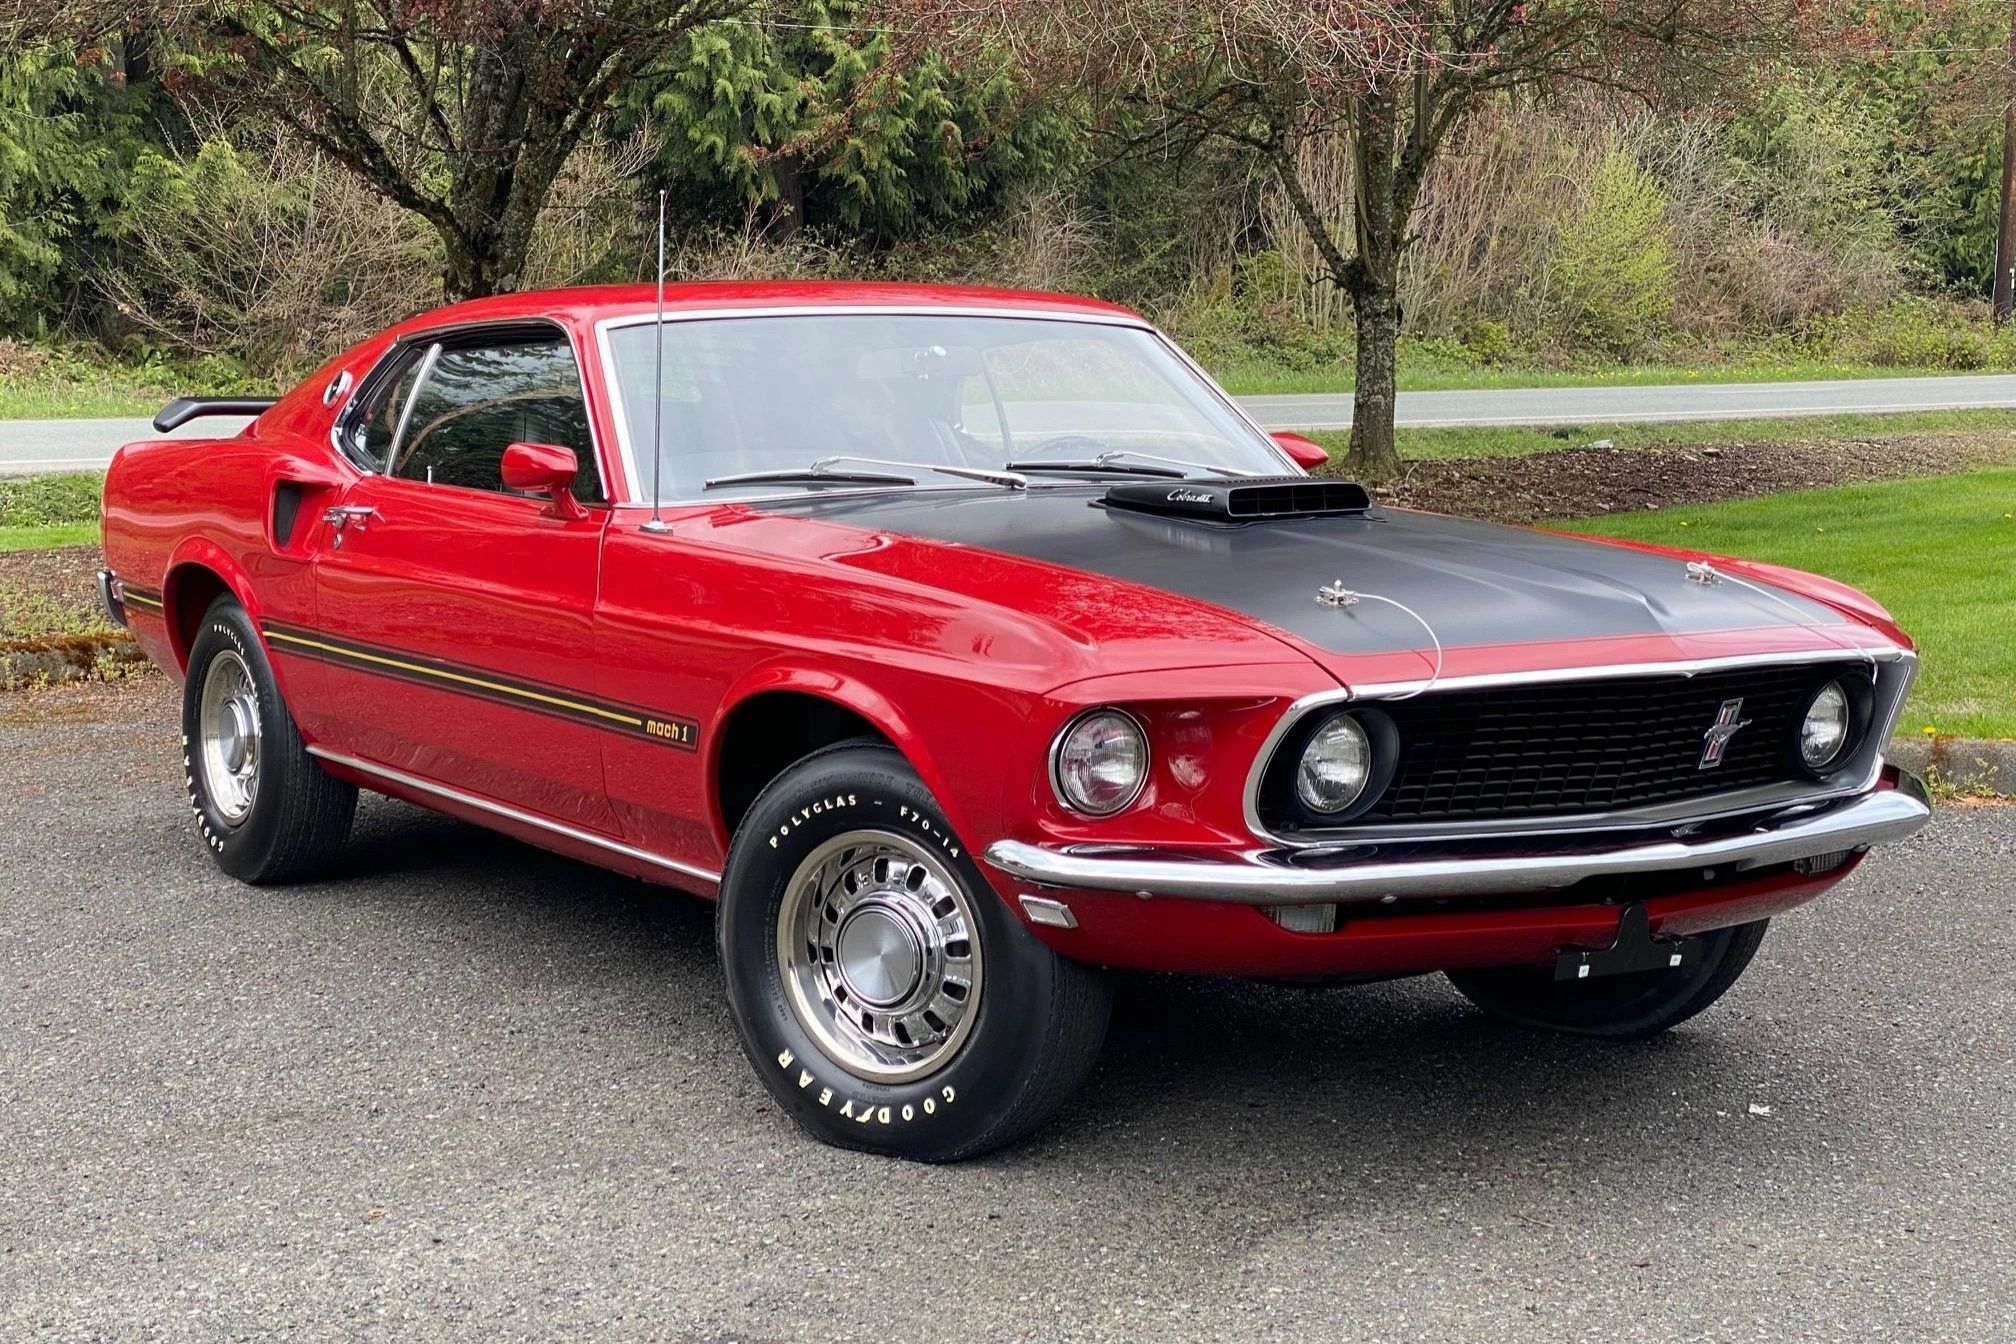 10 Things About The 1969 Ford Mustang Mach I Cobra Jet You Need To Know